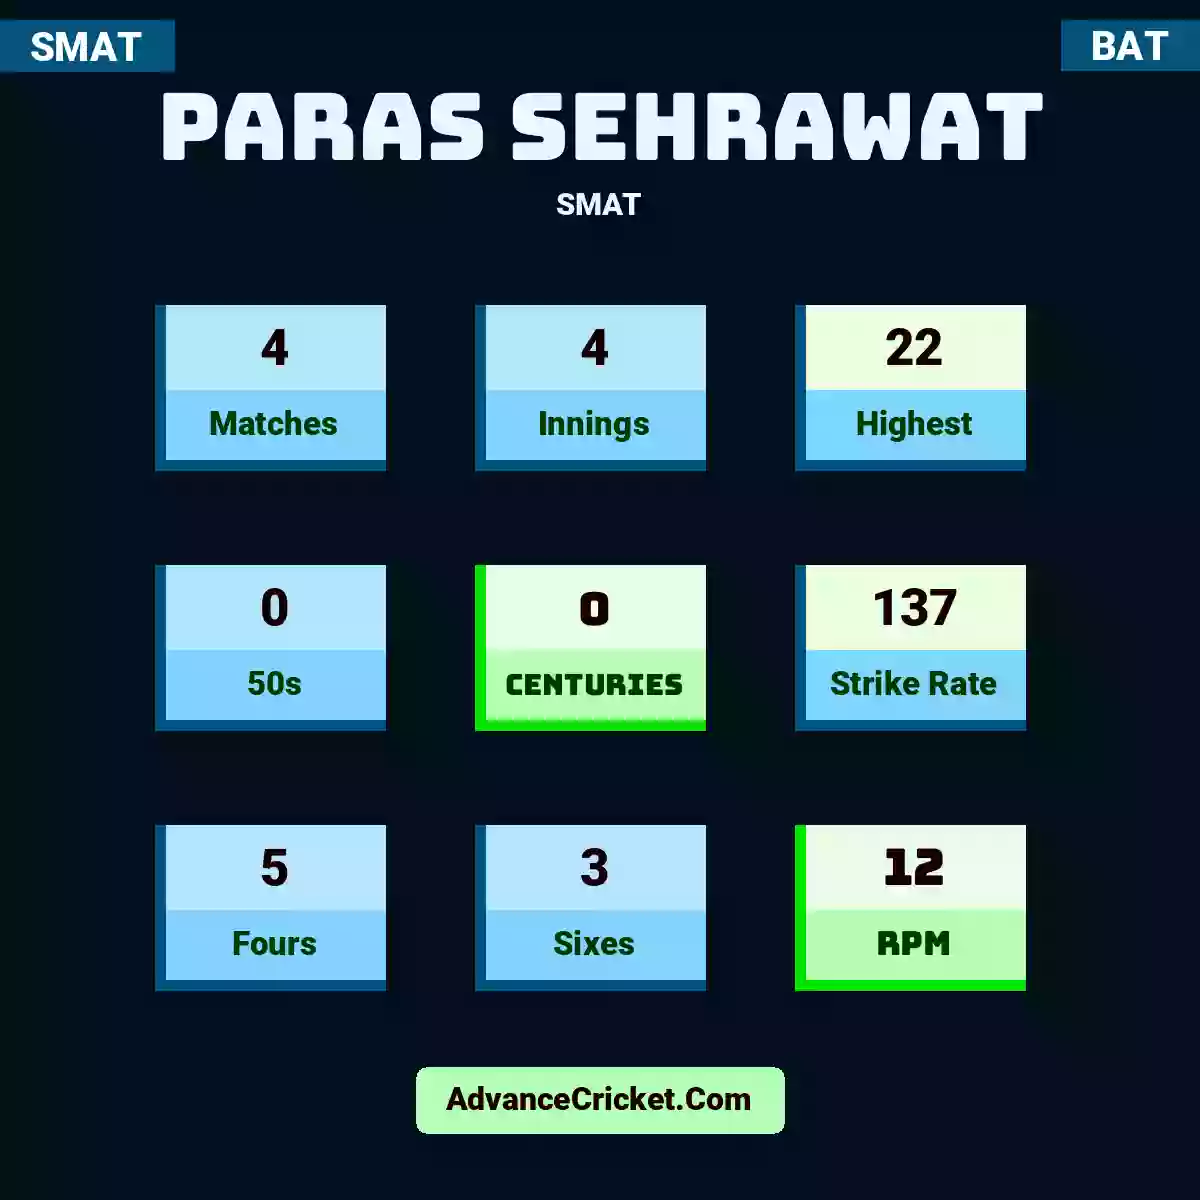 Paras Sehrawat SMAT , Paras Sehrawat played 4 matches, scored 22 runs as highest, 0 half-centuries, and 0 centuries, with a strike rate of 137. P.Sehrawat hit 5 fours and 3 sixes, with an RPM of 12.